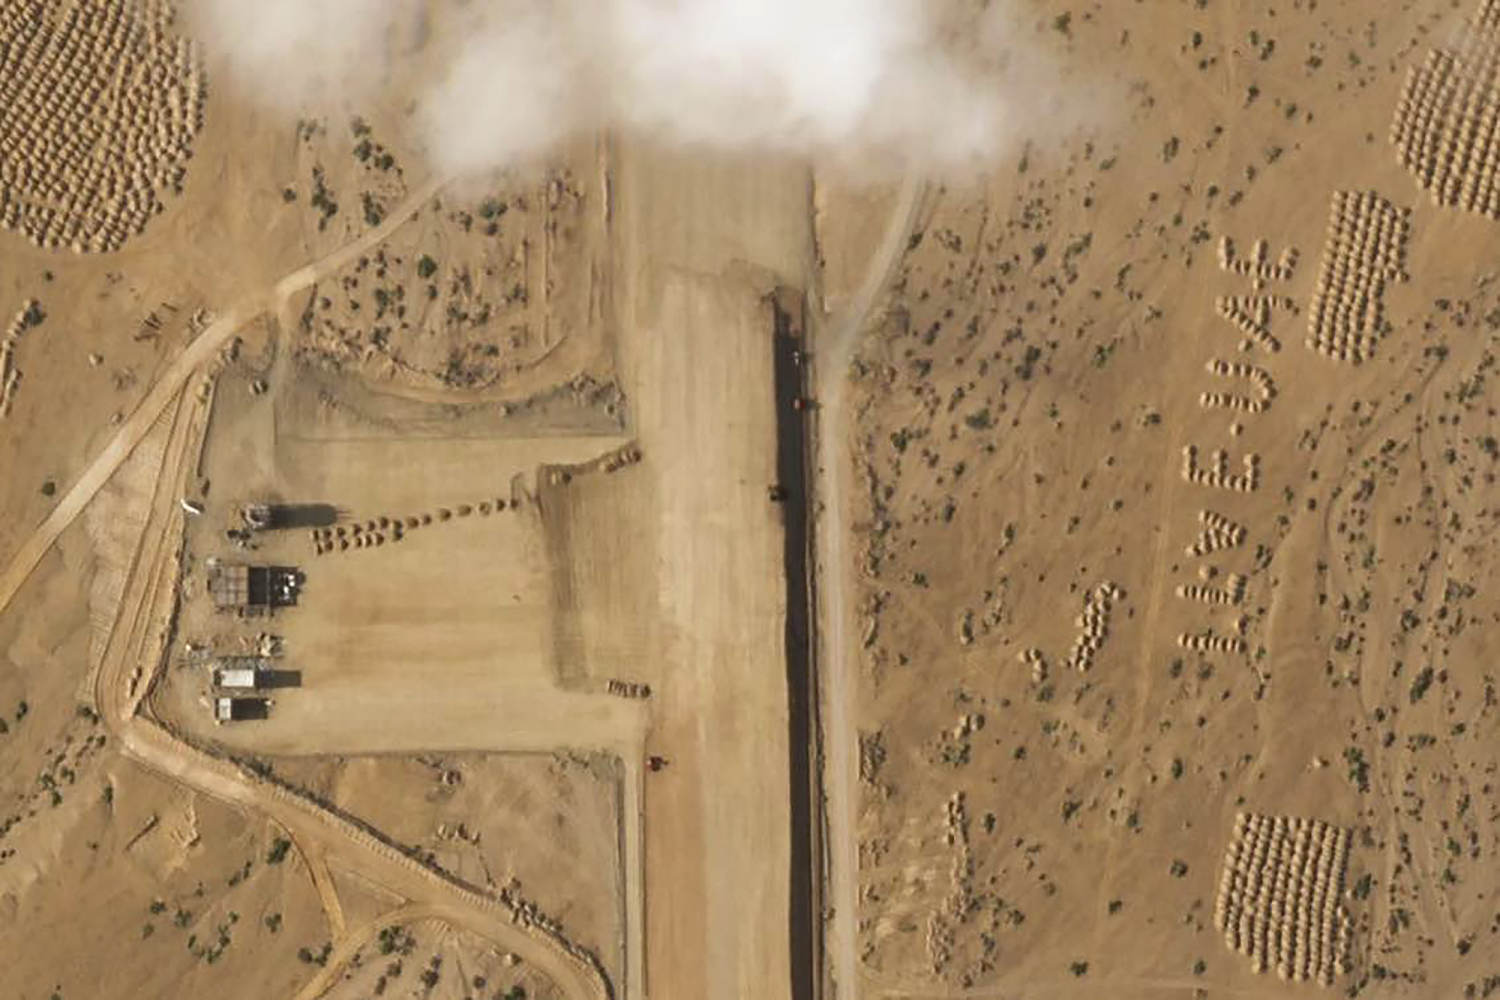 An airstrip is being built on a Yemeni island near the Red Sea with 'I LOVE UAE' next to it